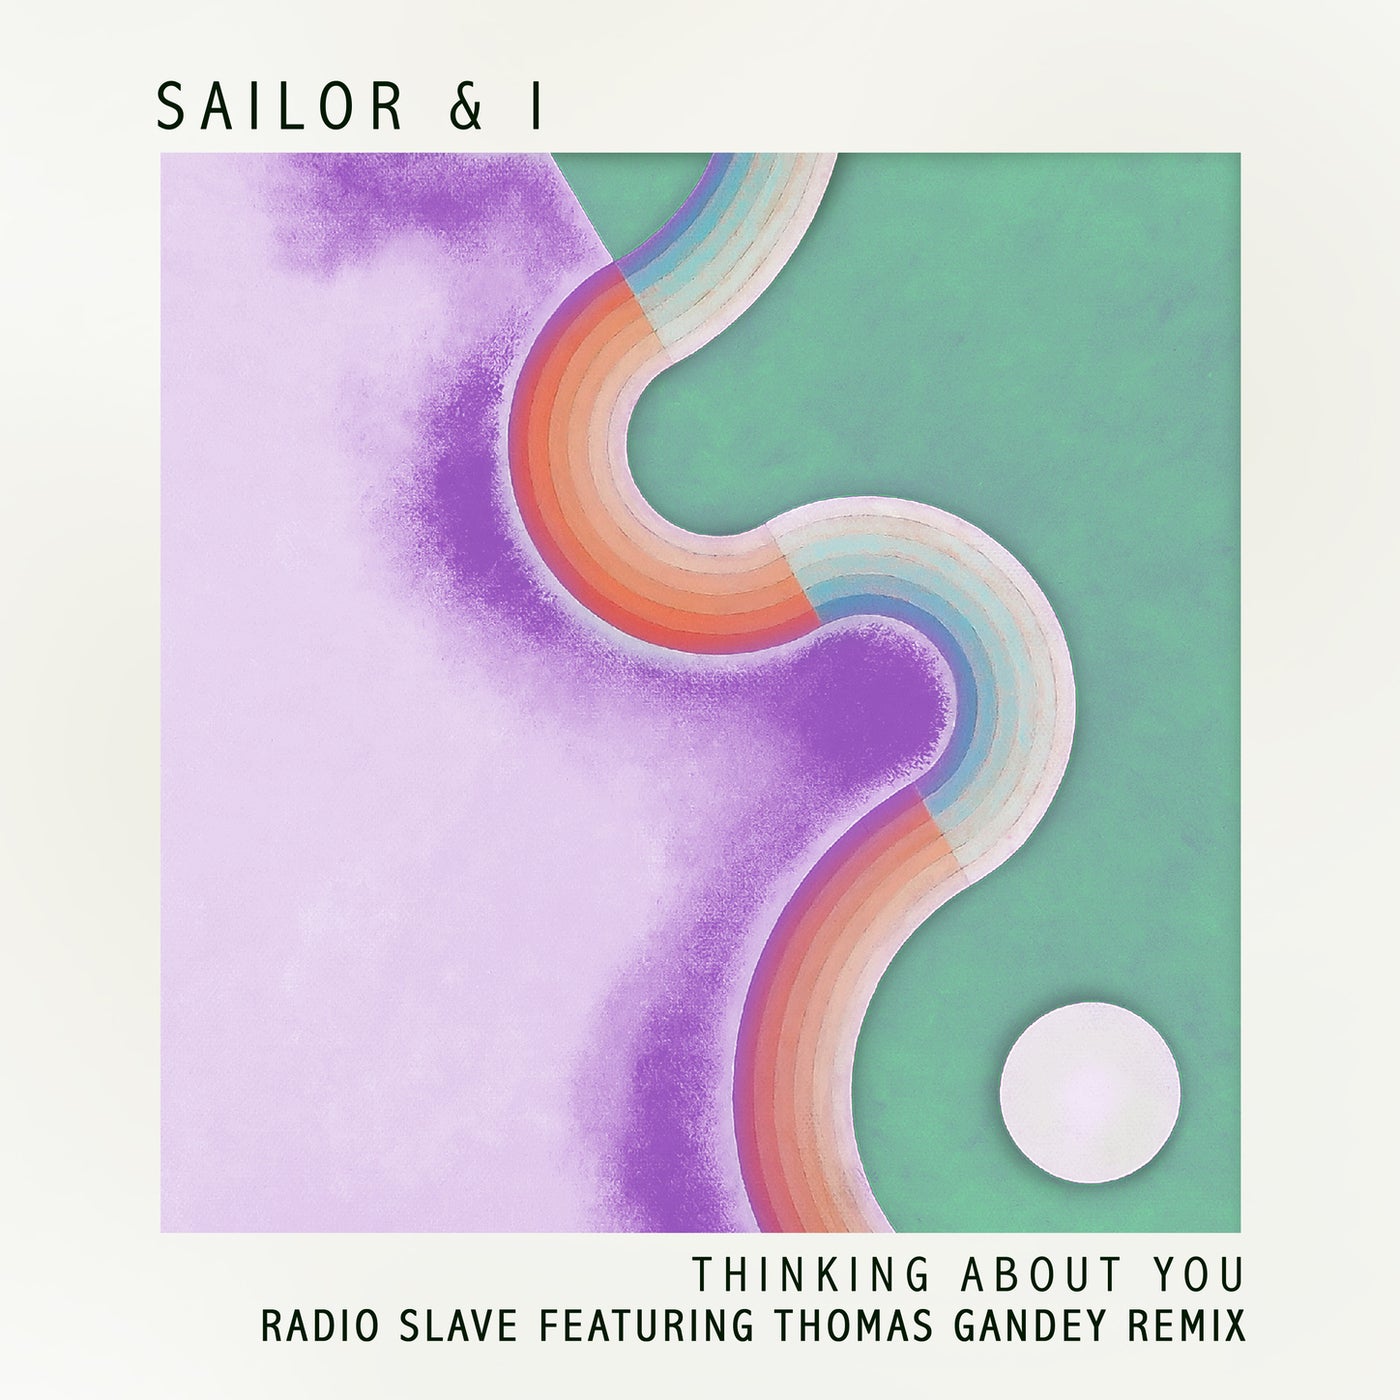 Sailor & I - Thinking About You [MP015]